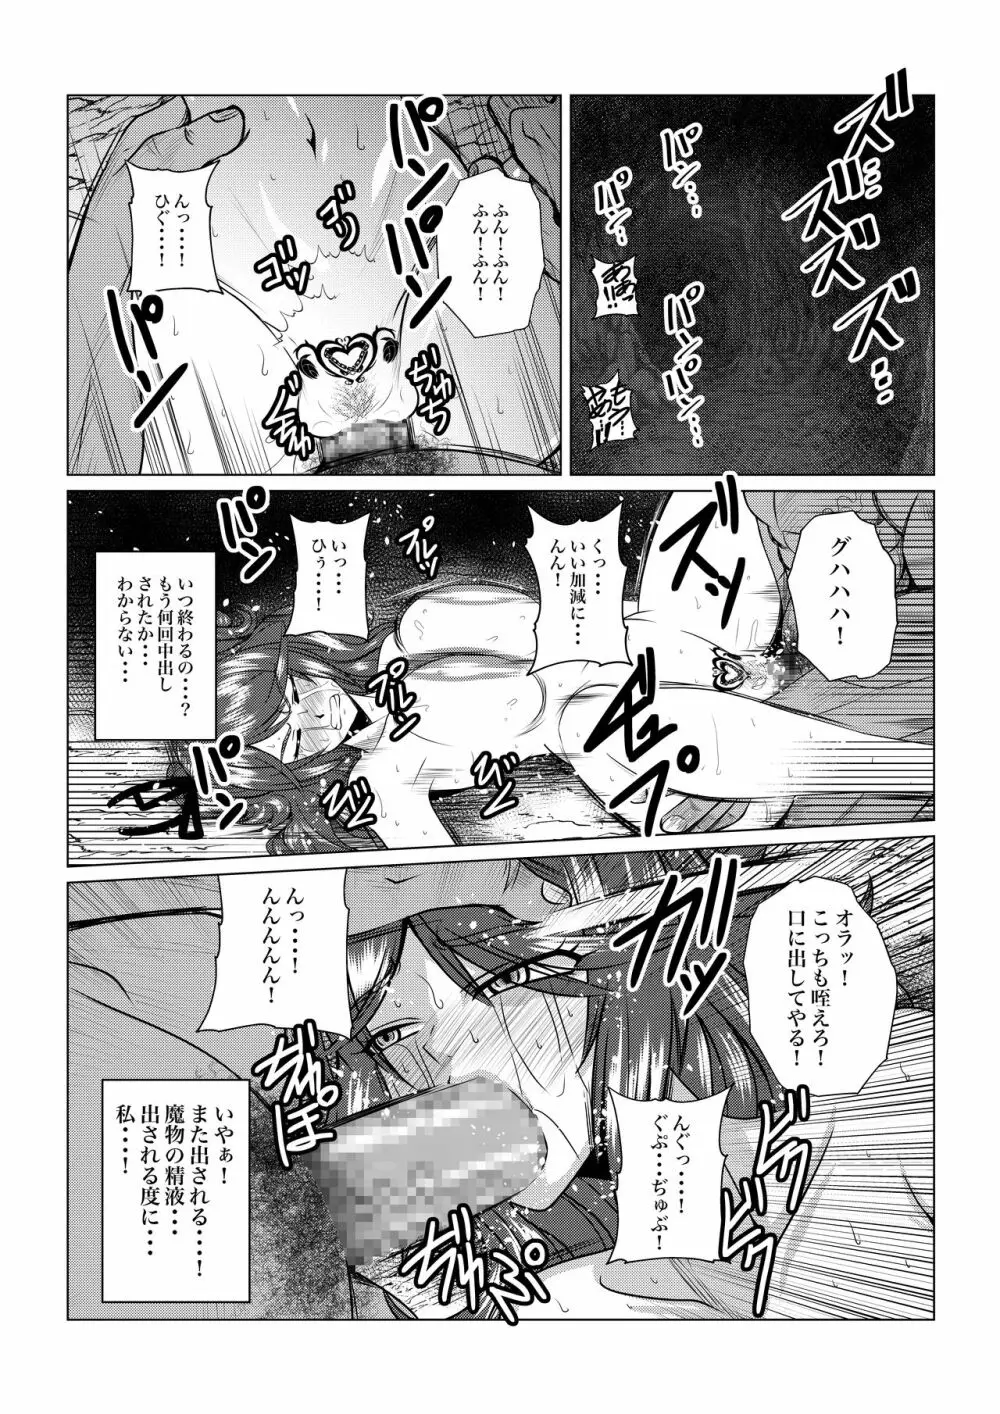 Tales Of DarkSide〜三散華〜 - page3